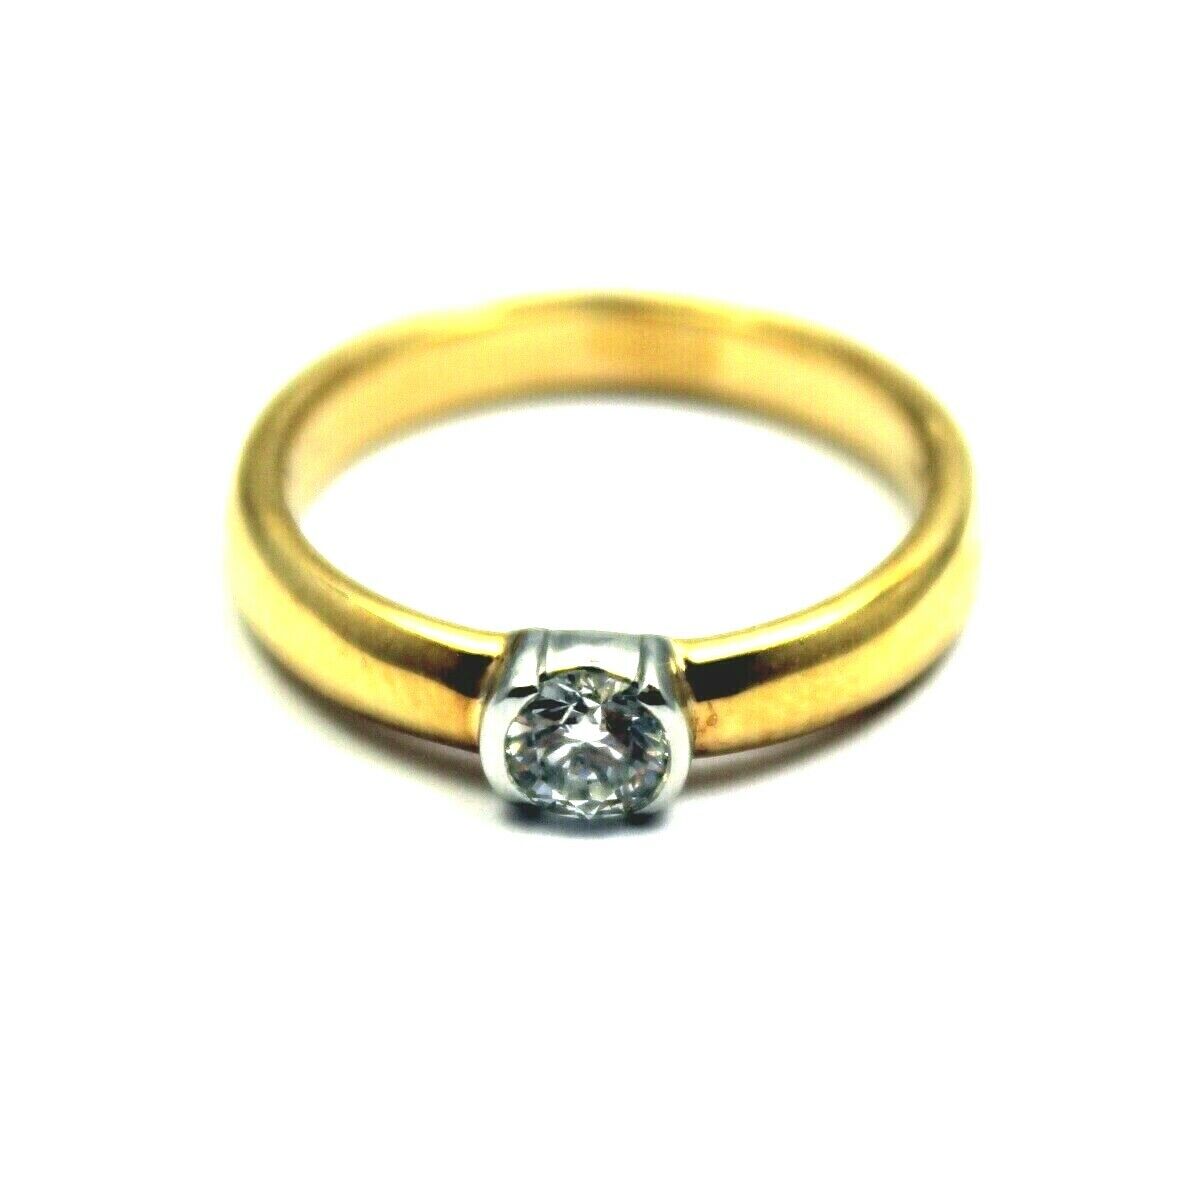 Tiffany & Co. Jewelry & Watches:Vintage & Antique Jewelry:Rings Authentic Tiffany & Co. 18k + Platinum 0.33ct Diamond I/VS1 Engagement Ring Cert